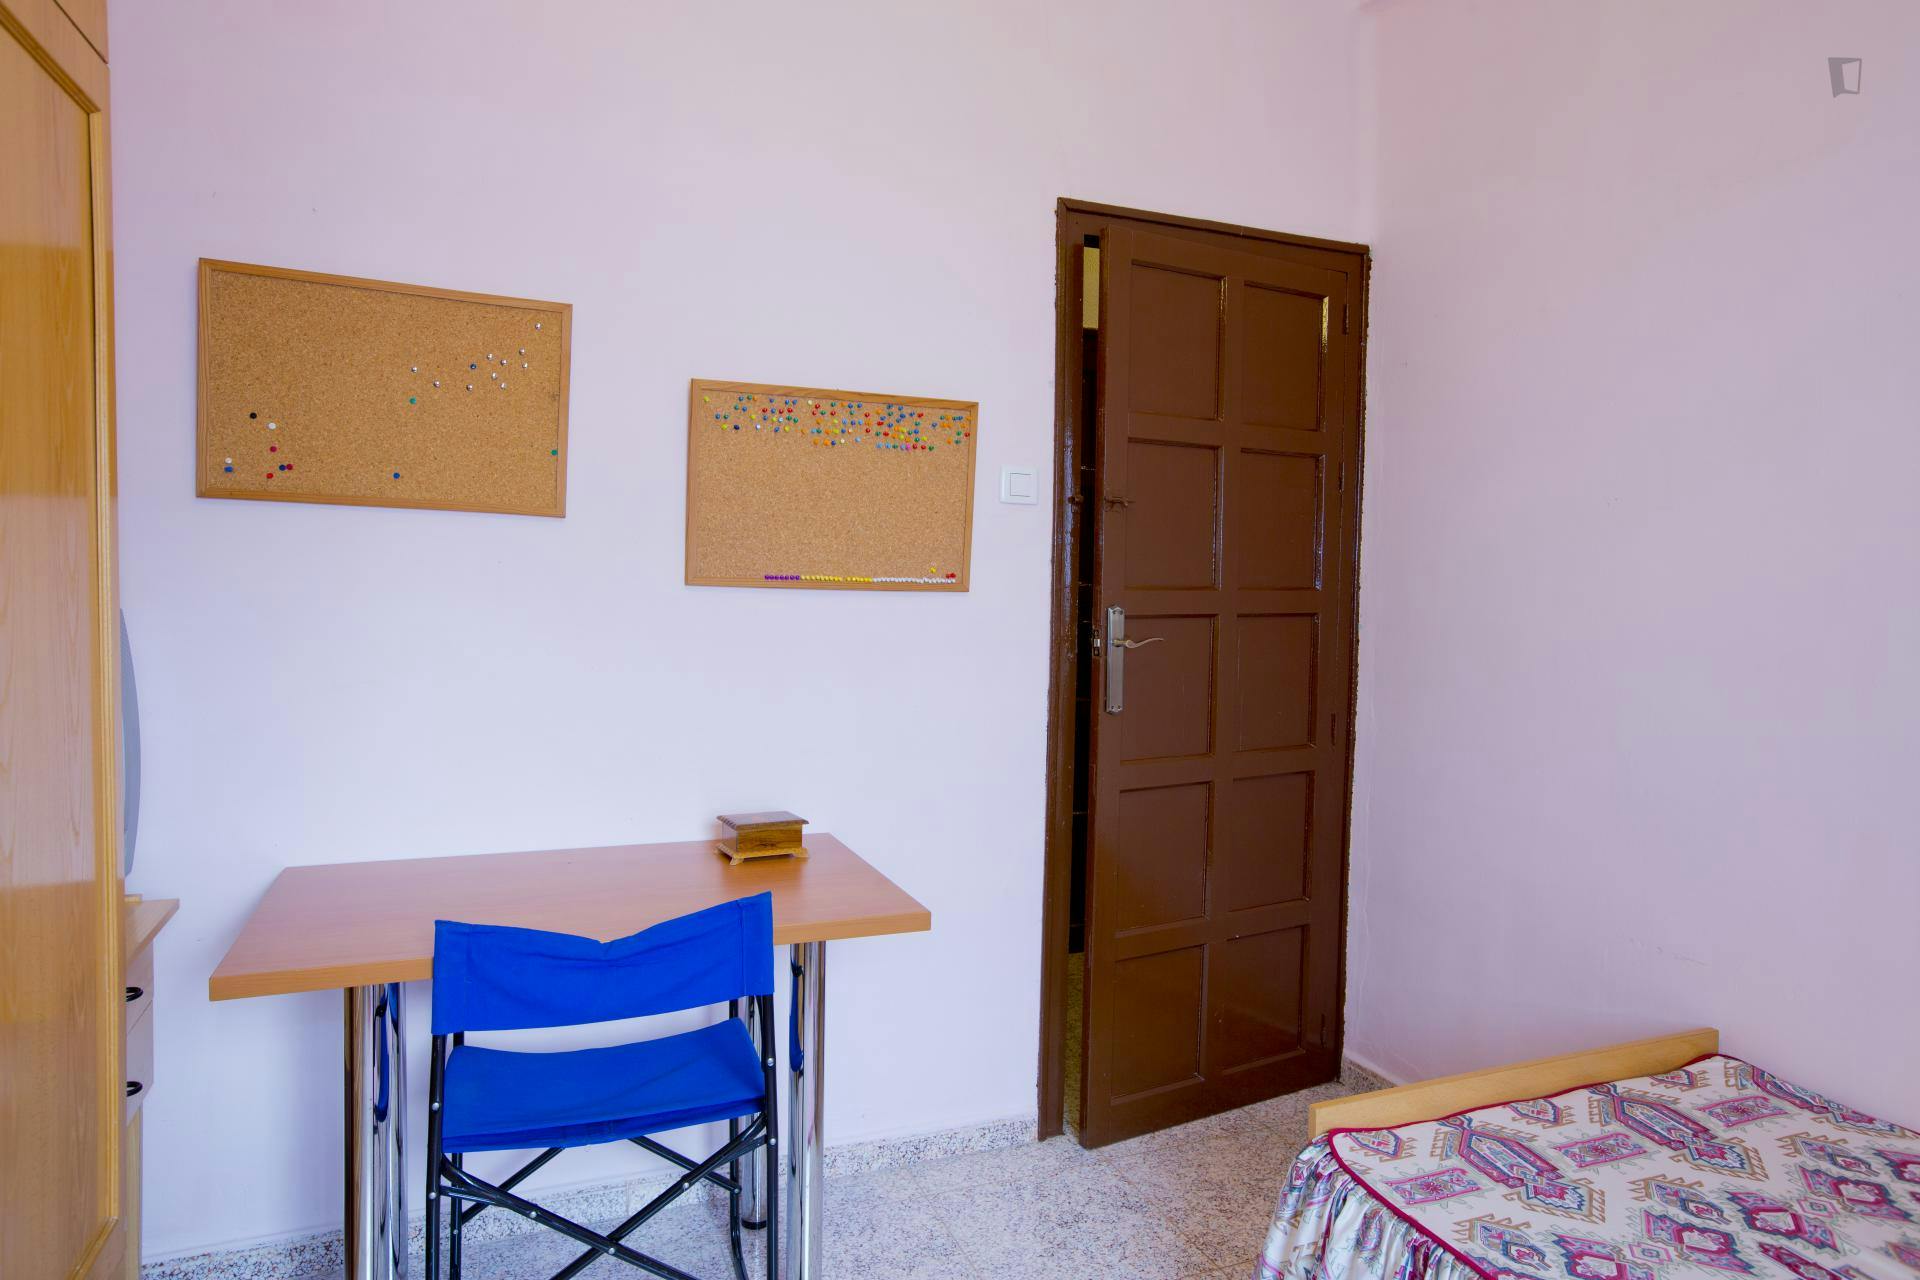 Single bedroom in a typical 4-bedroom house, in Macarena